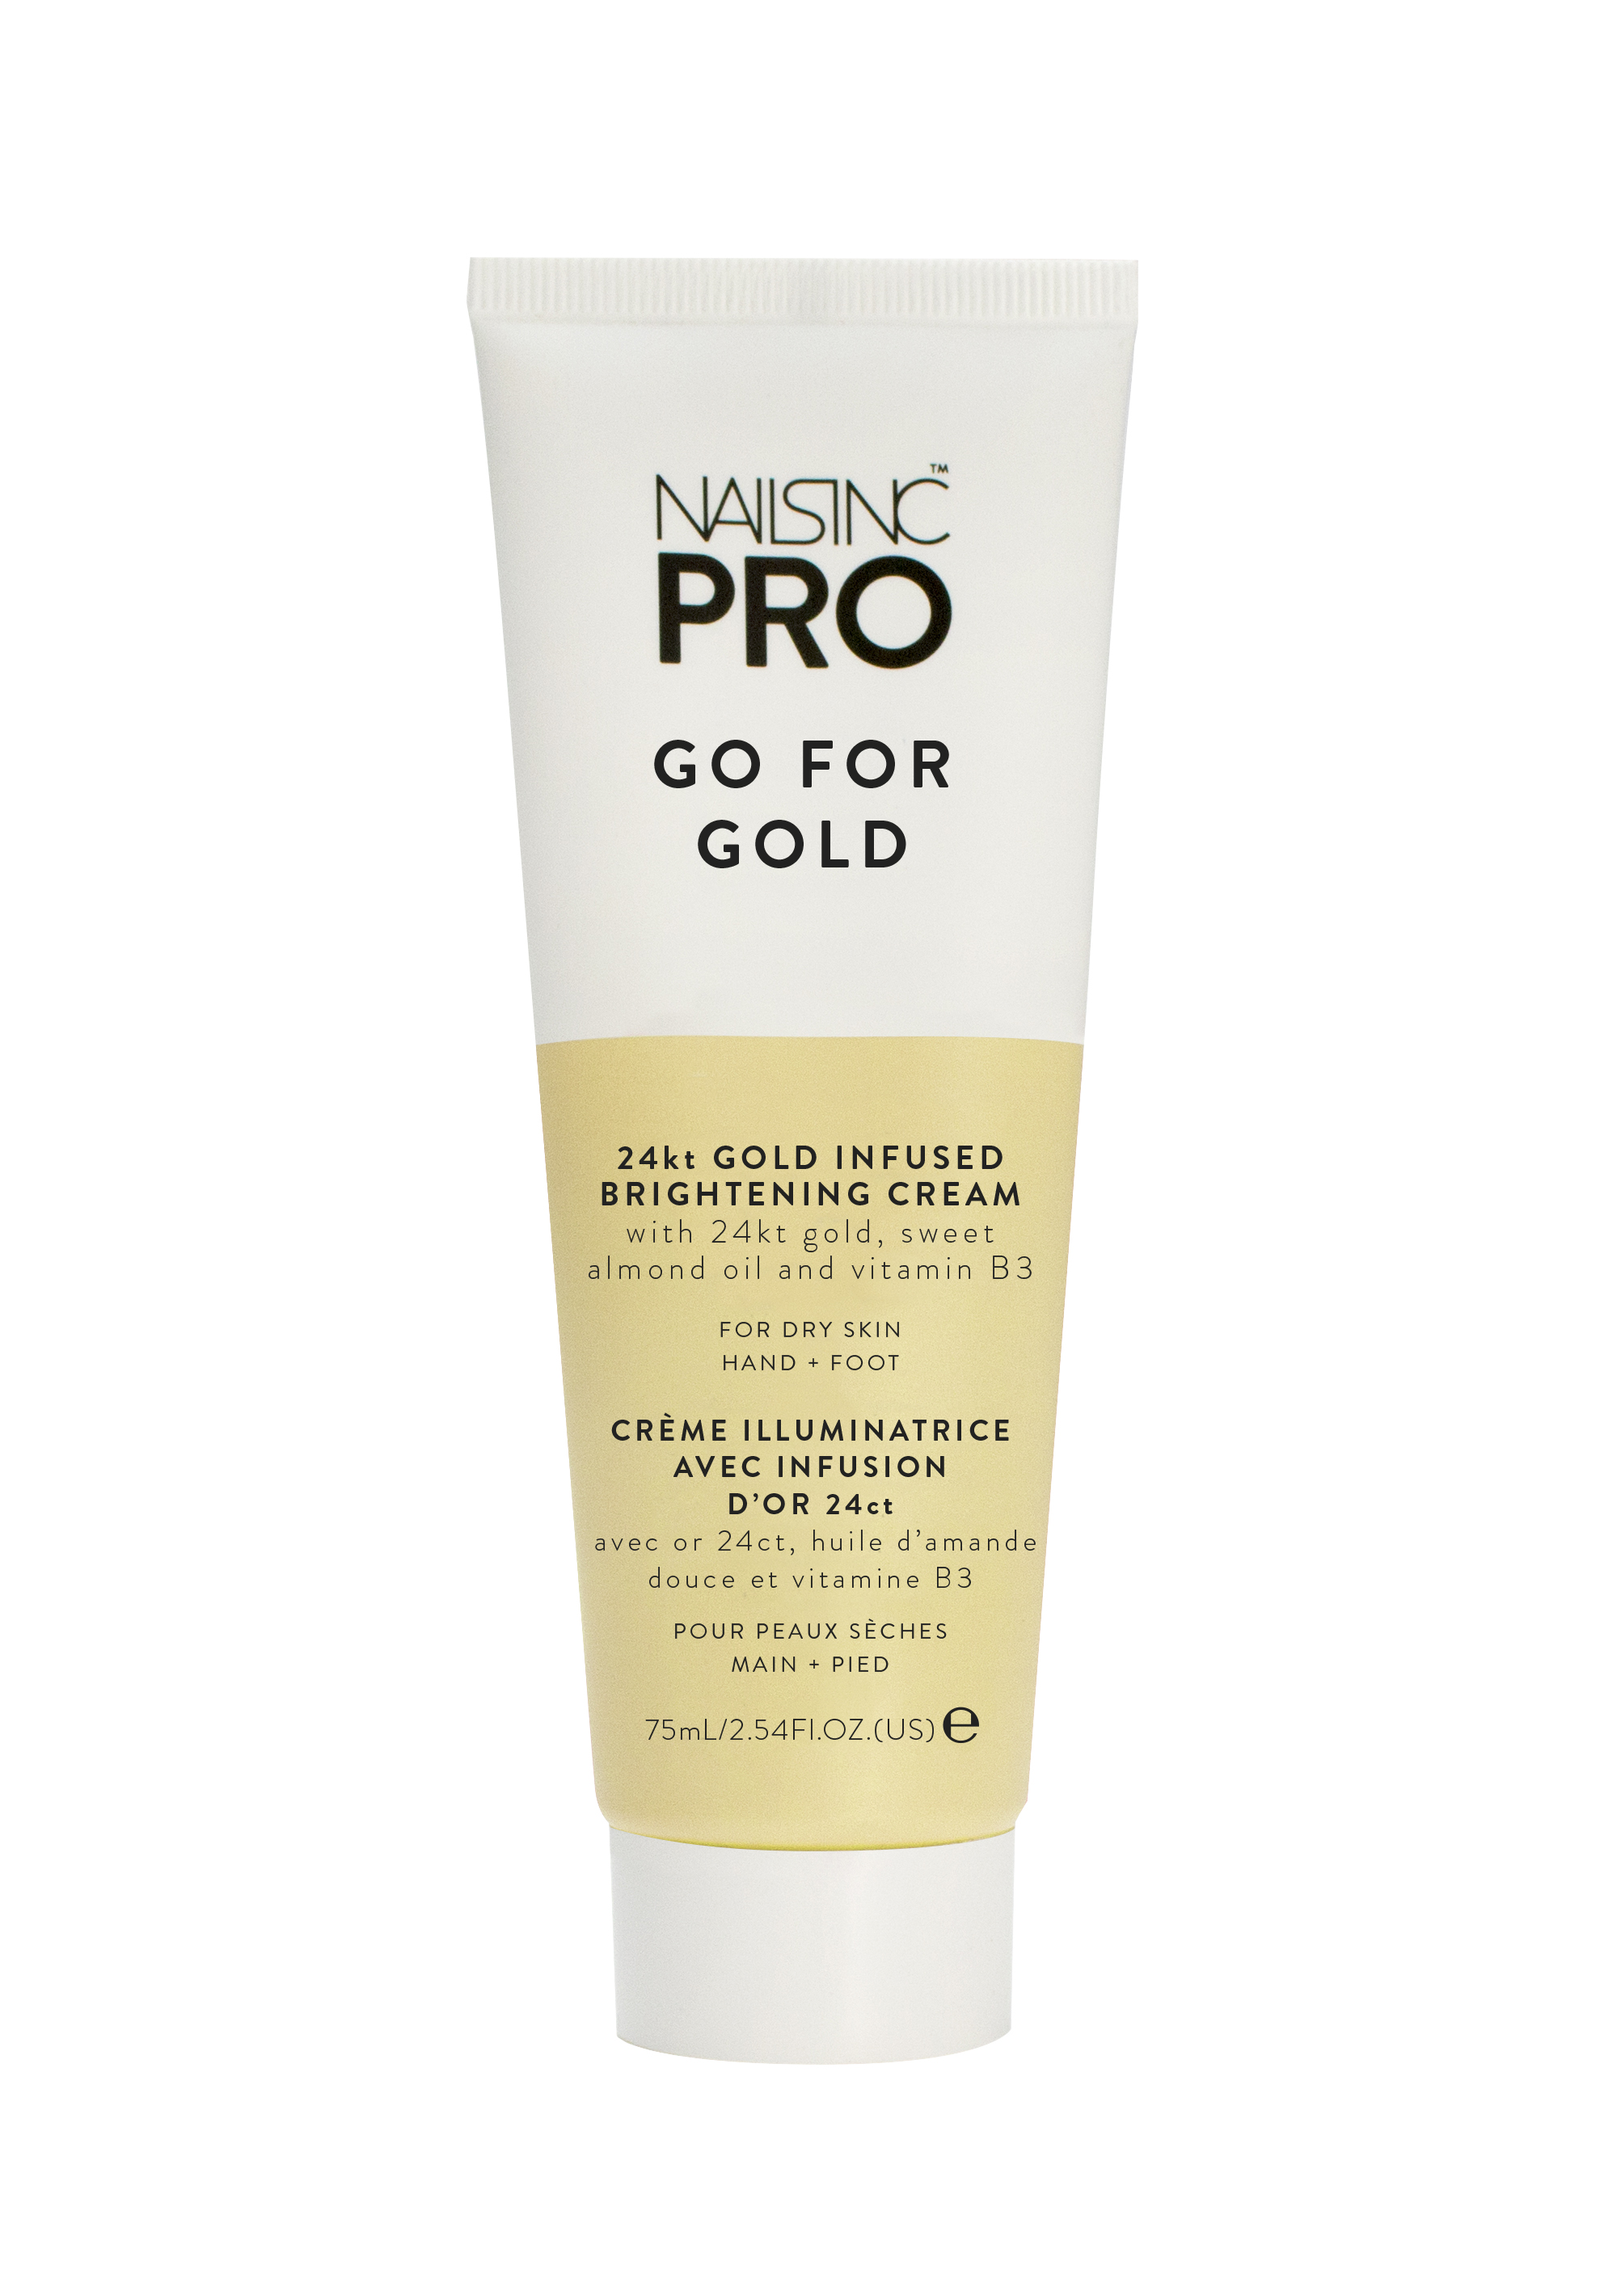 Nails Inc Pro 24k Gold Infused Brightening Cream - Go For Gold 75ml